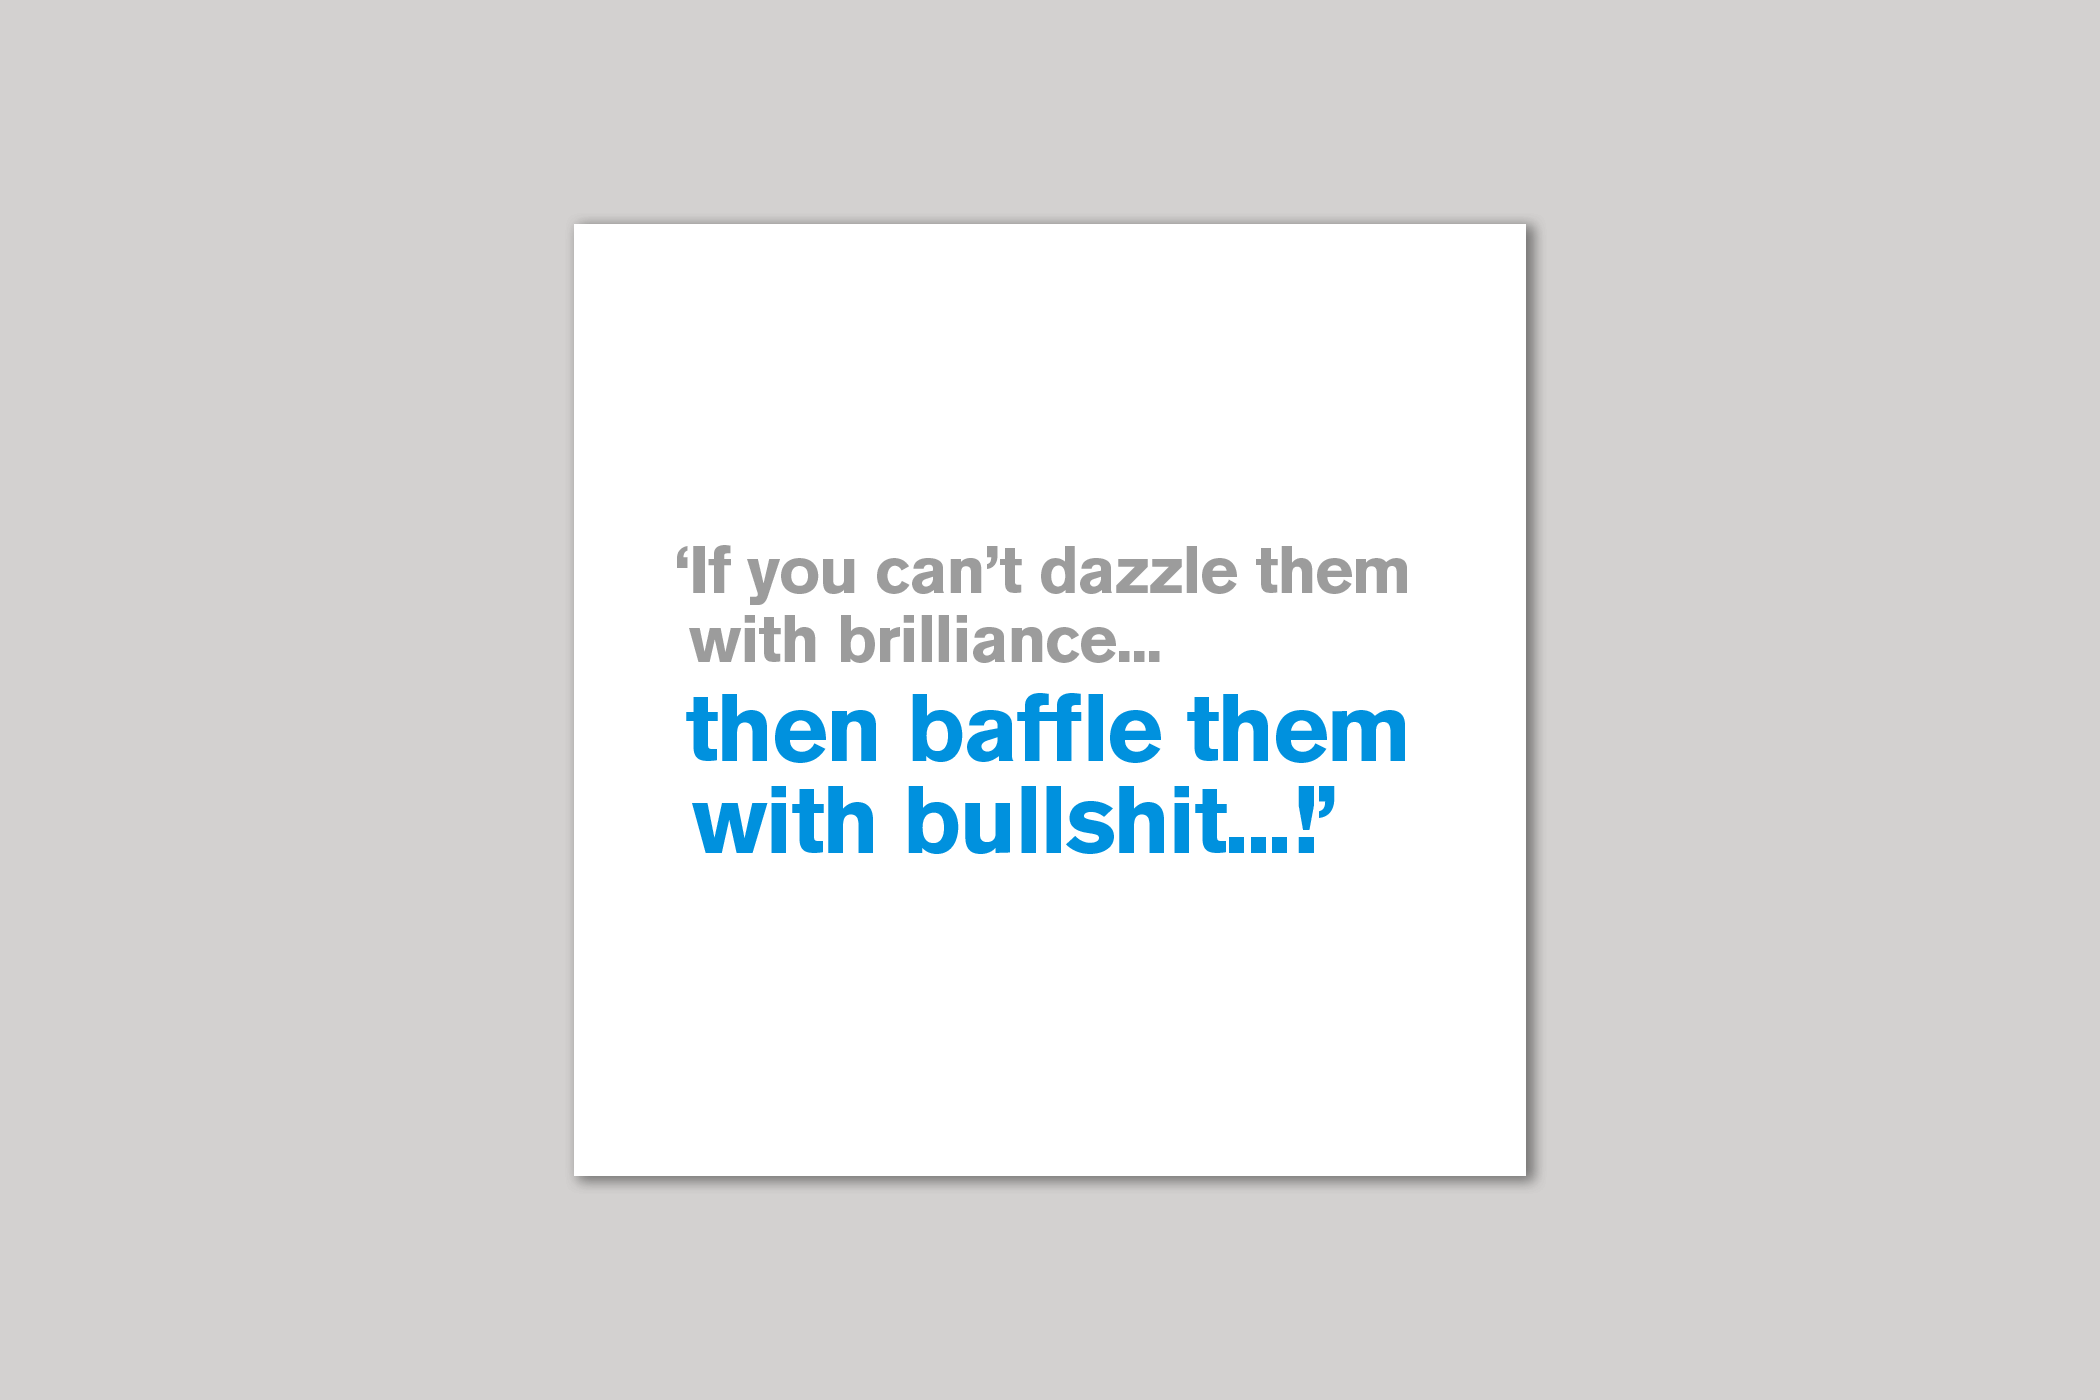 Baffle Them with Bullshit new job card from Lyric range of quotation cards by Icon.